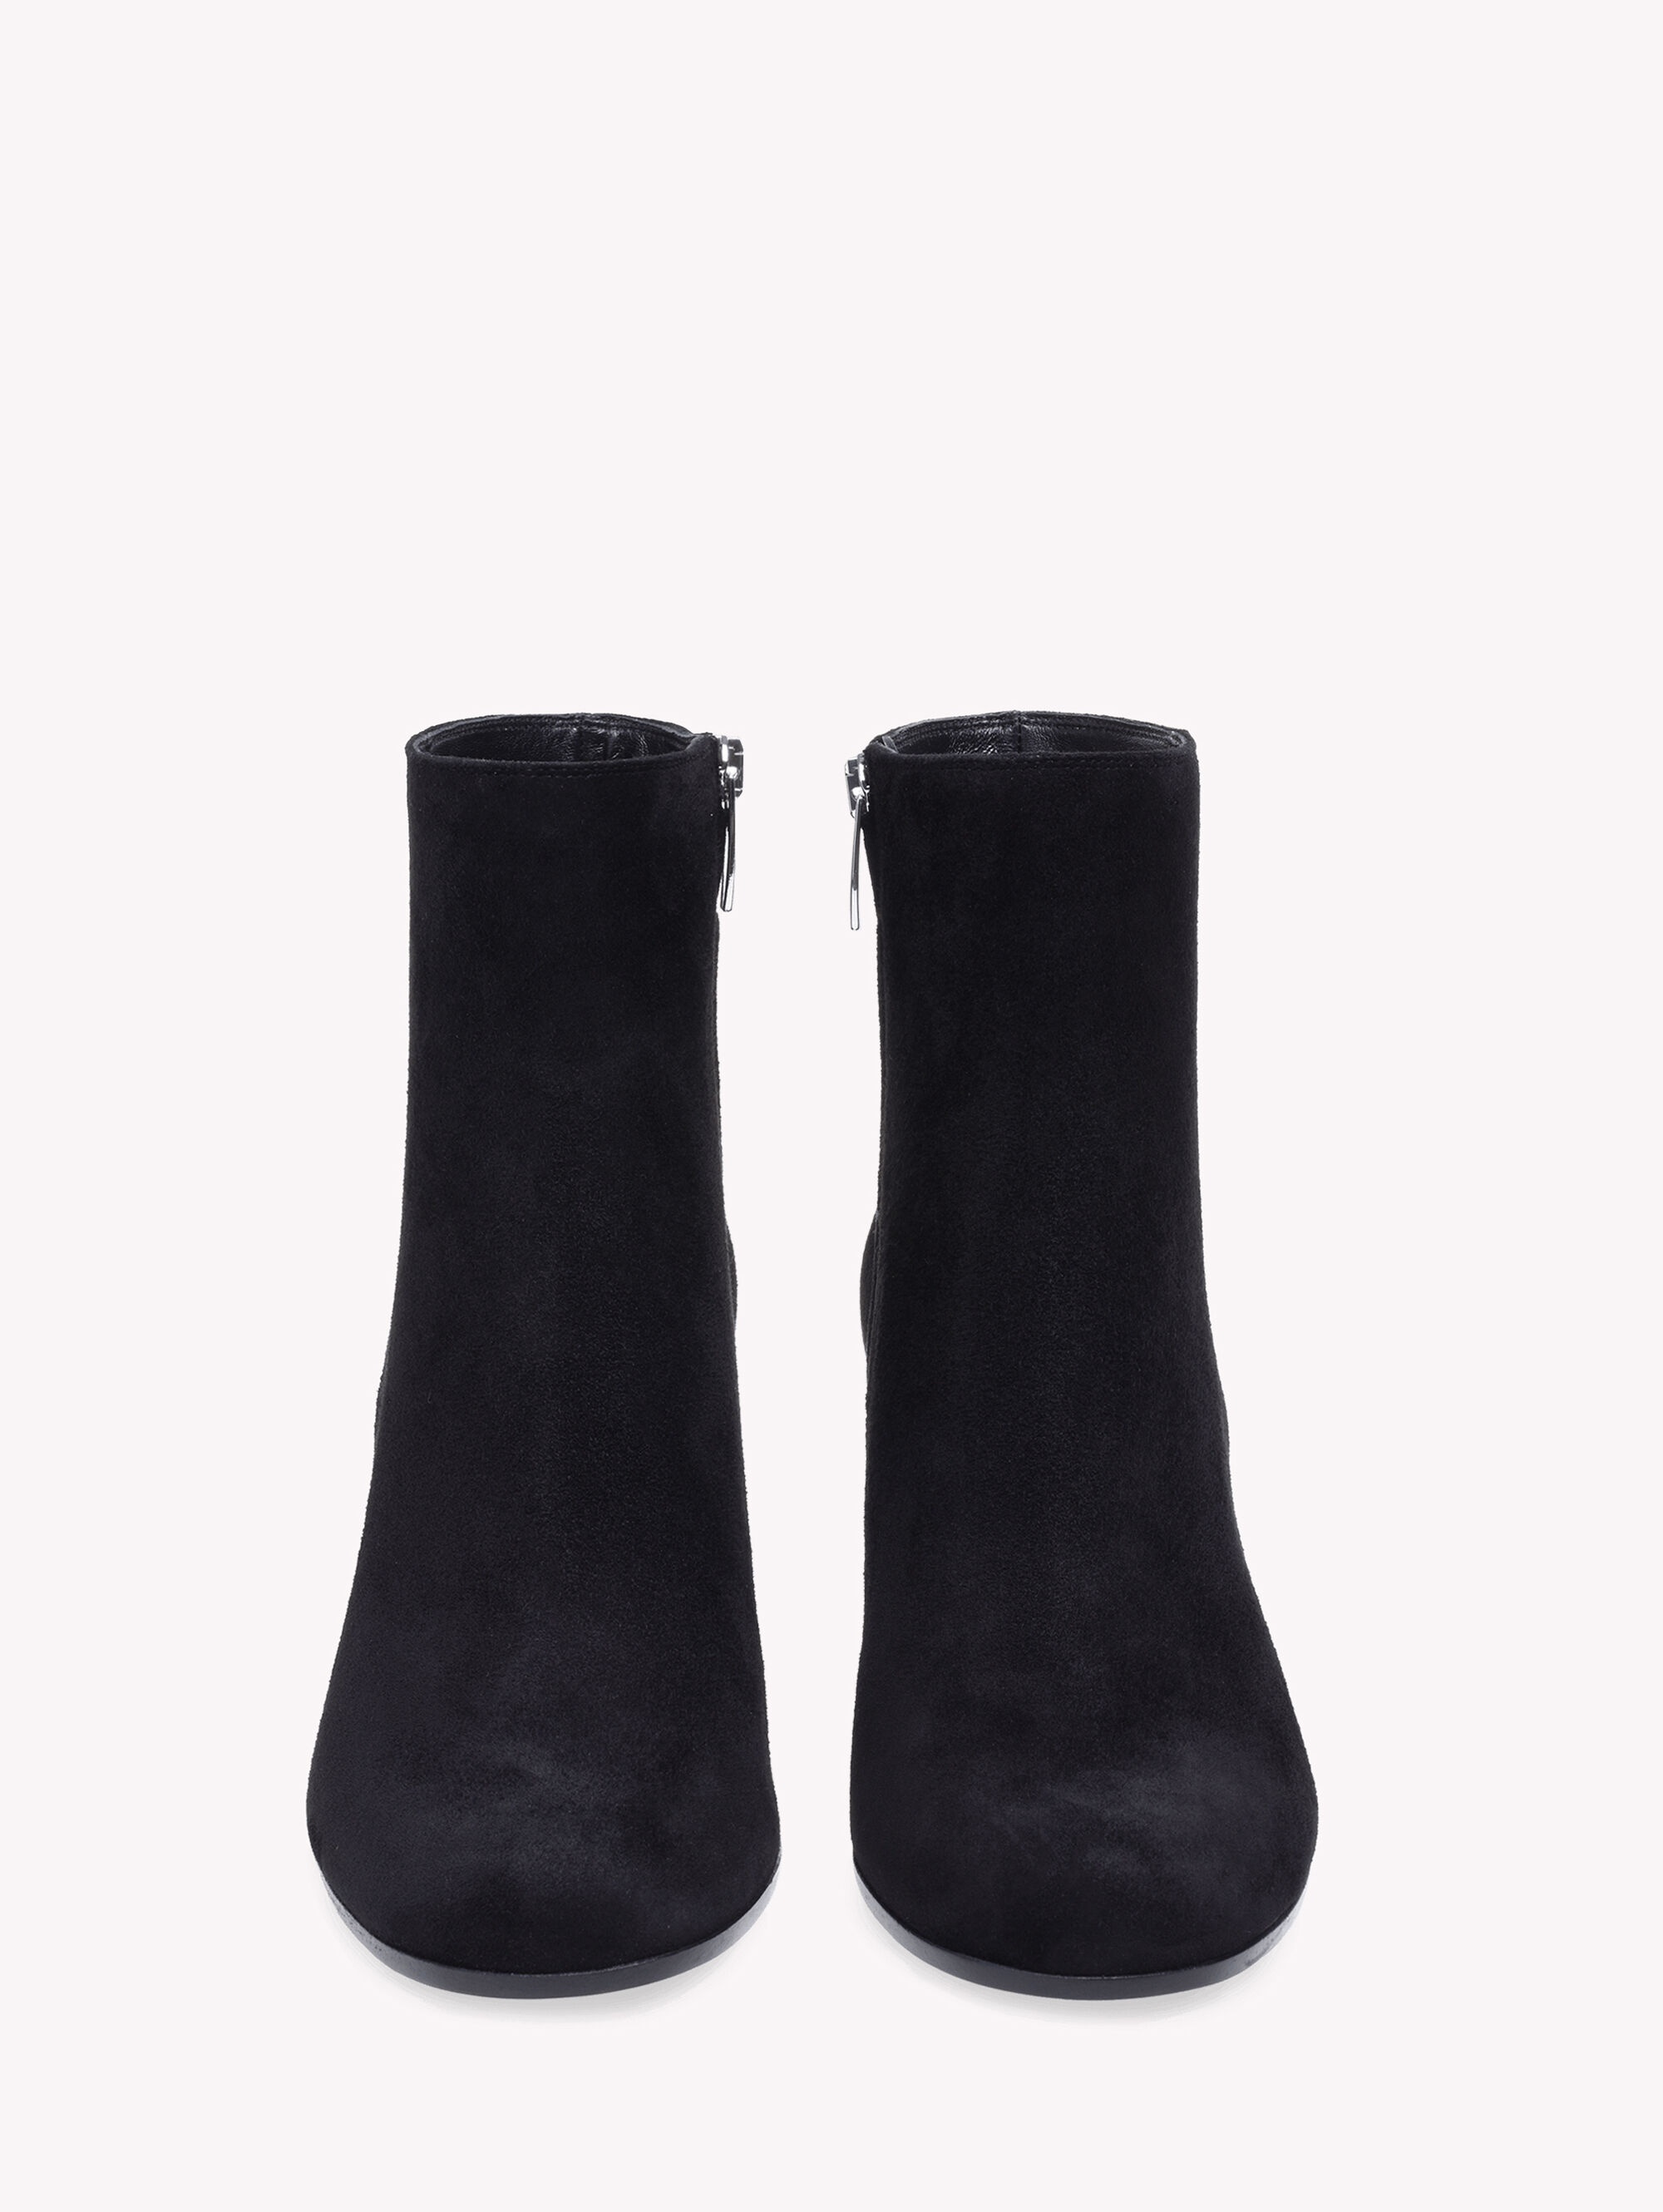 Ankle Boots for Women MARGAUX MID BOOTIE | Gianvito Rossi